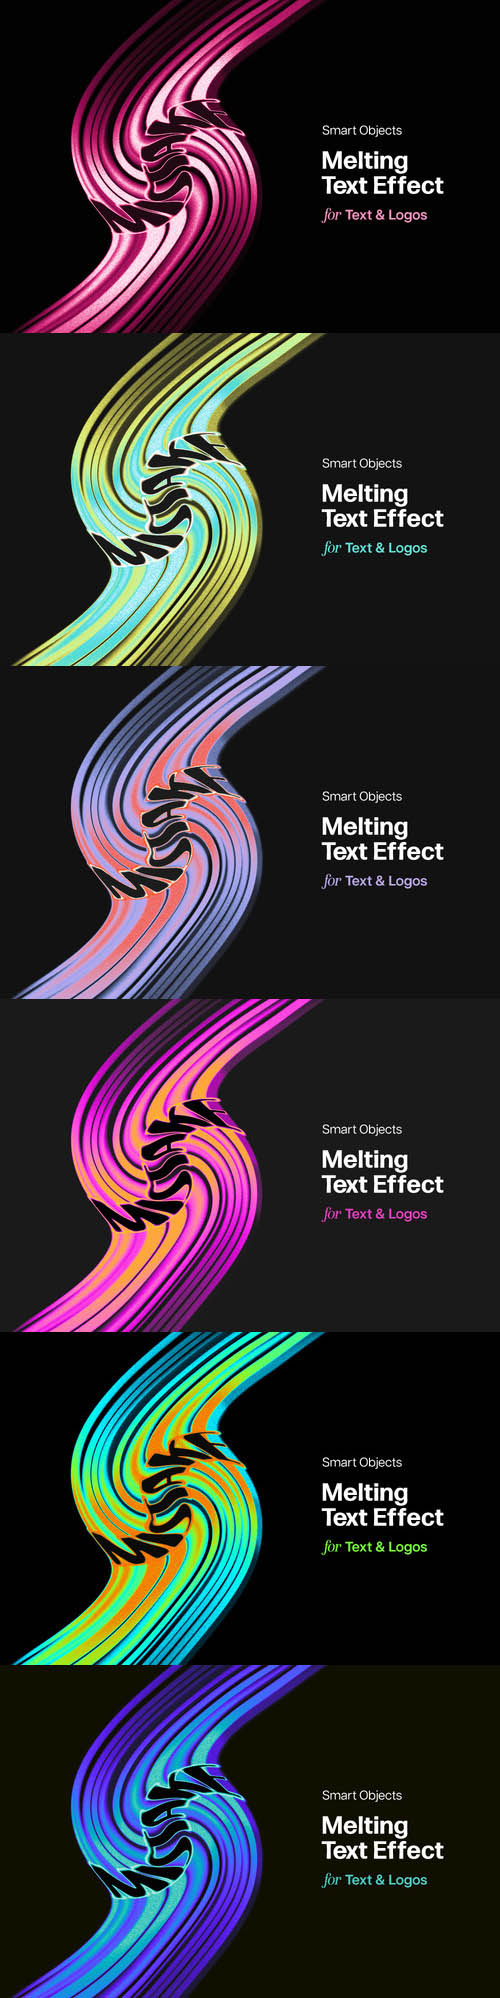 PSD melted text effect